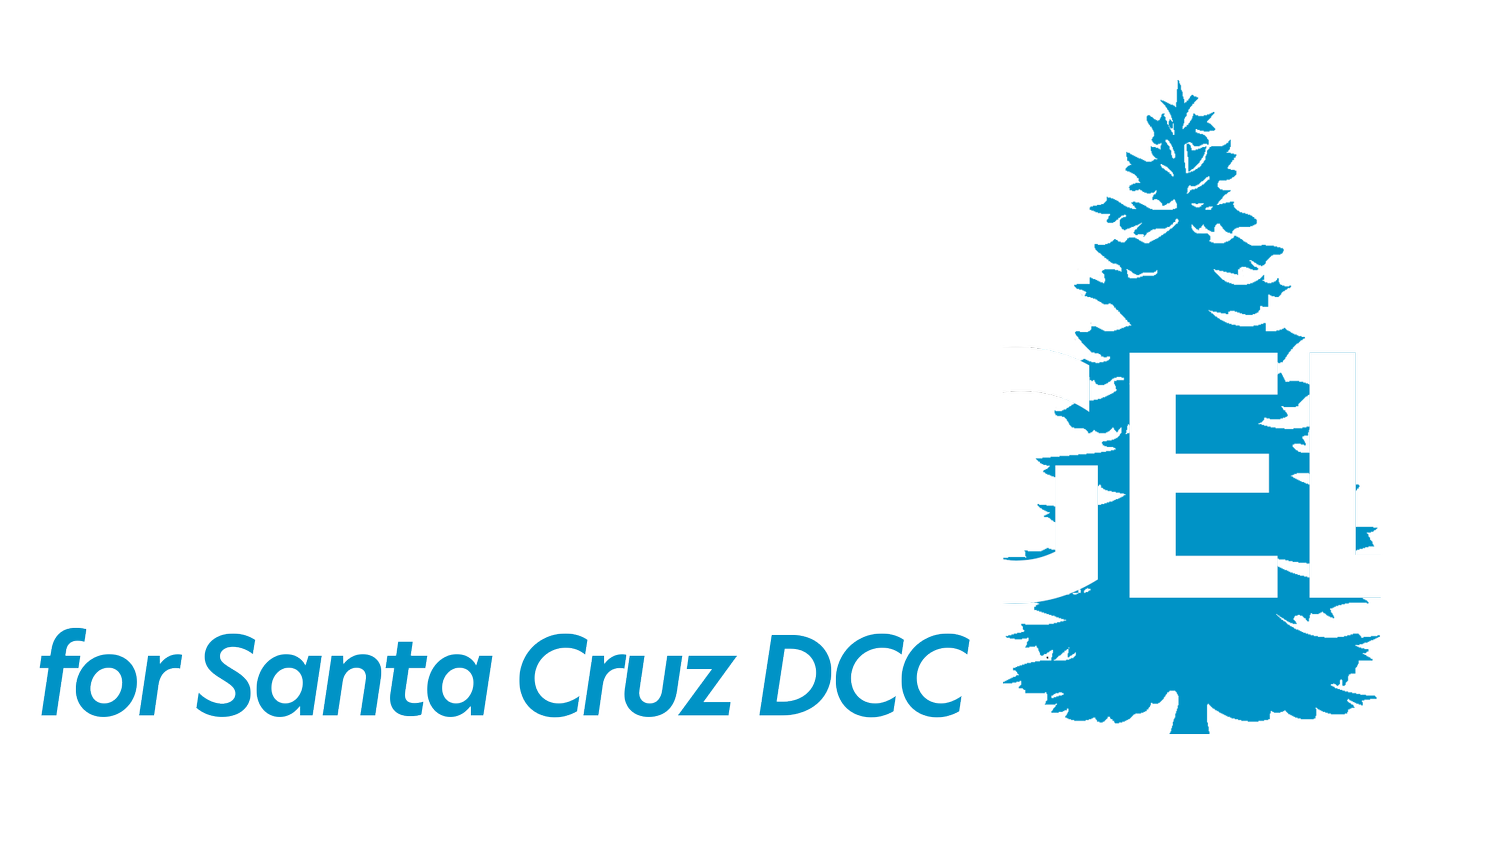 Bodie Shargel for DCC